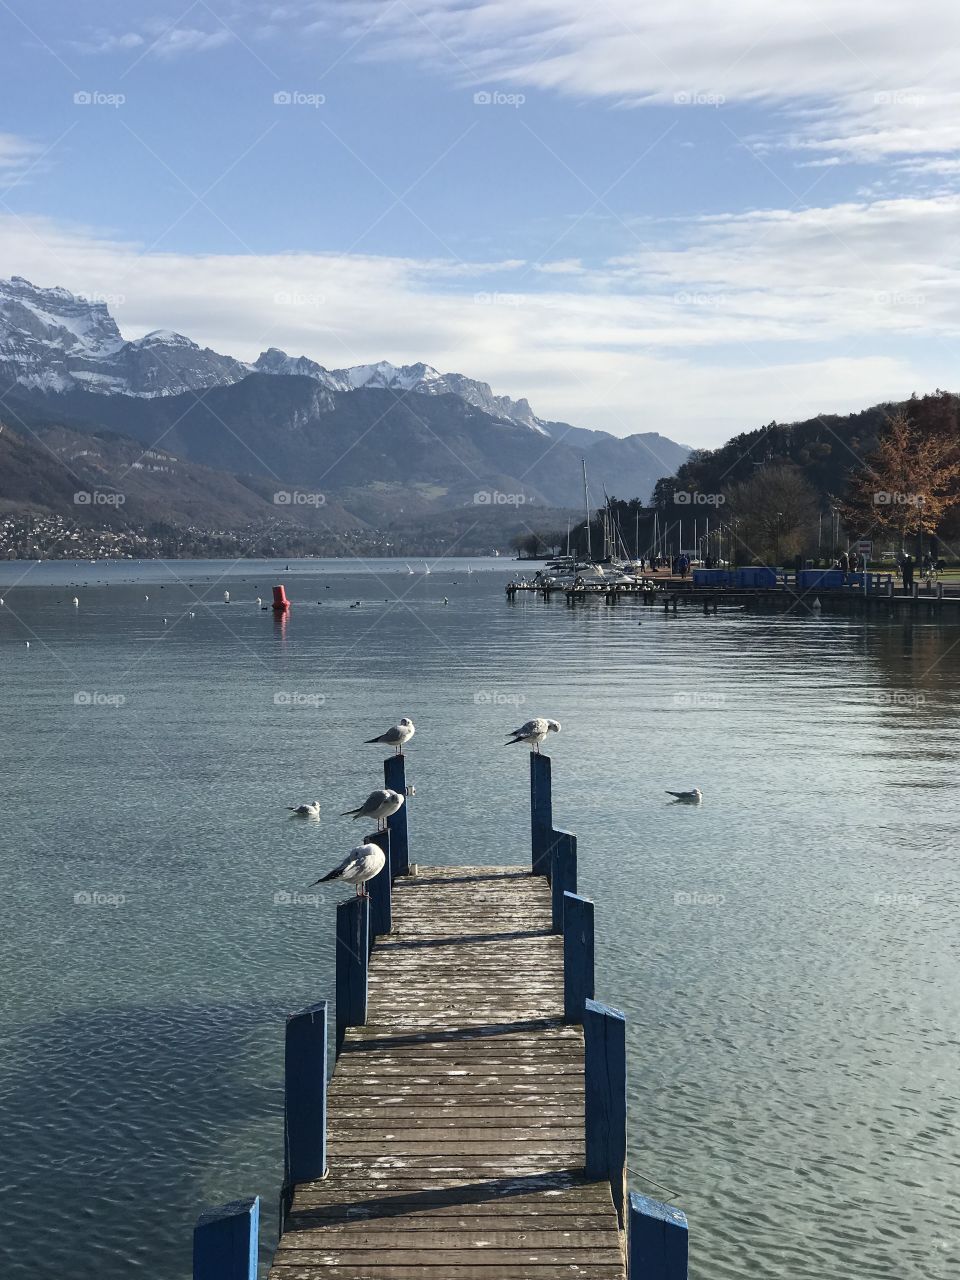 Lake Annecy France 